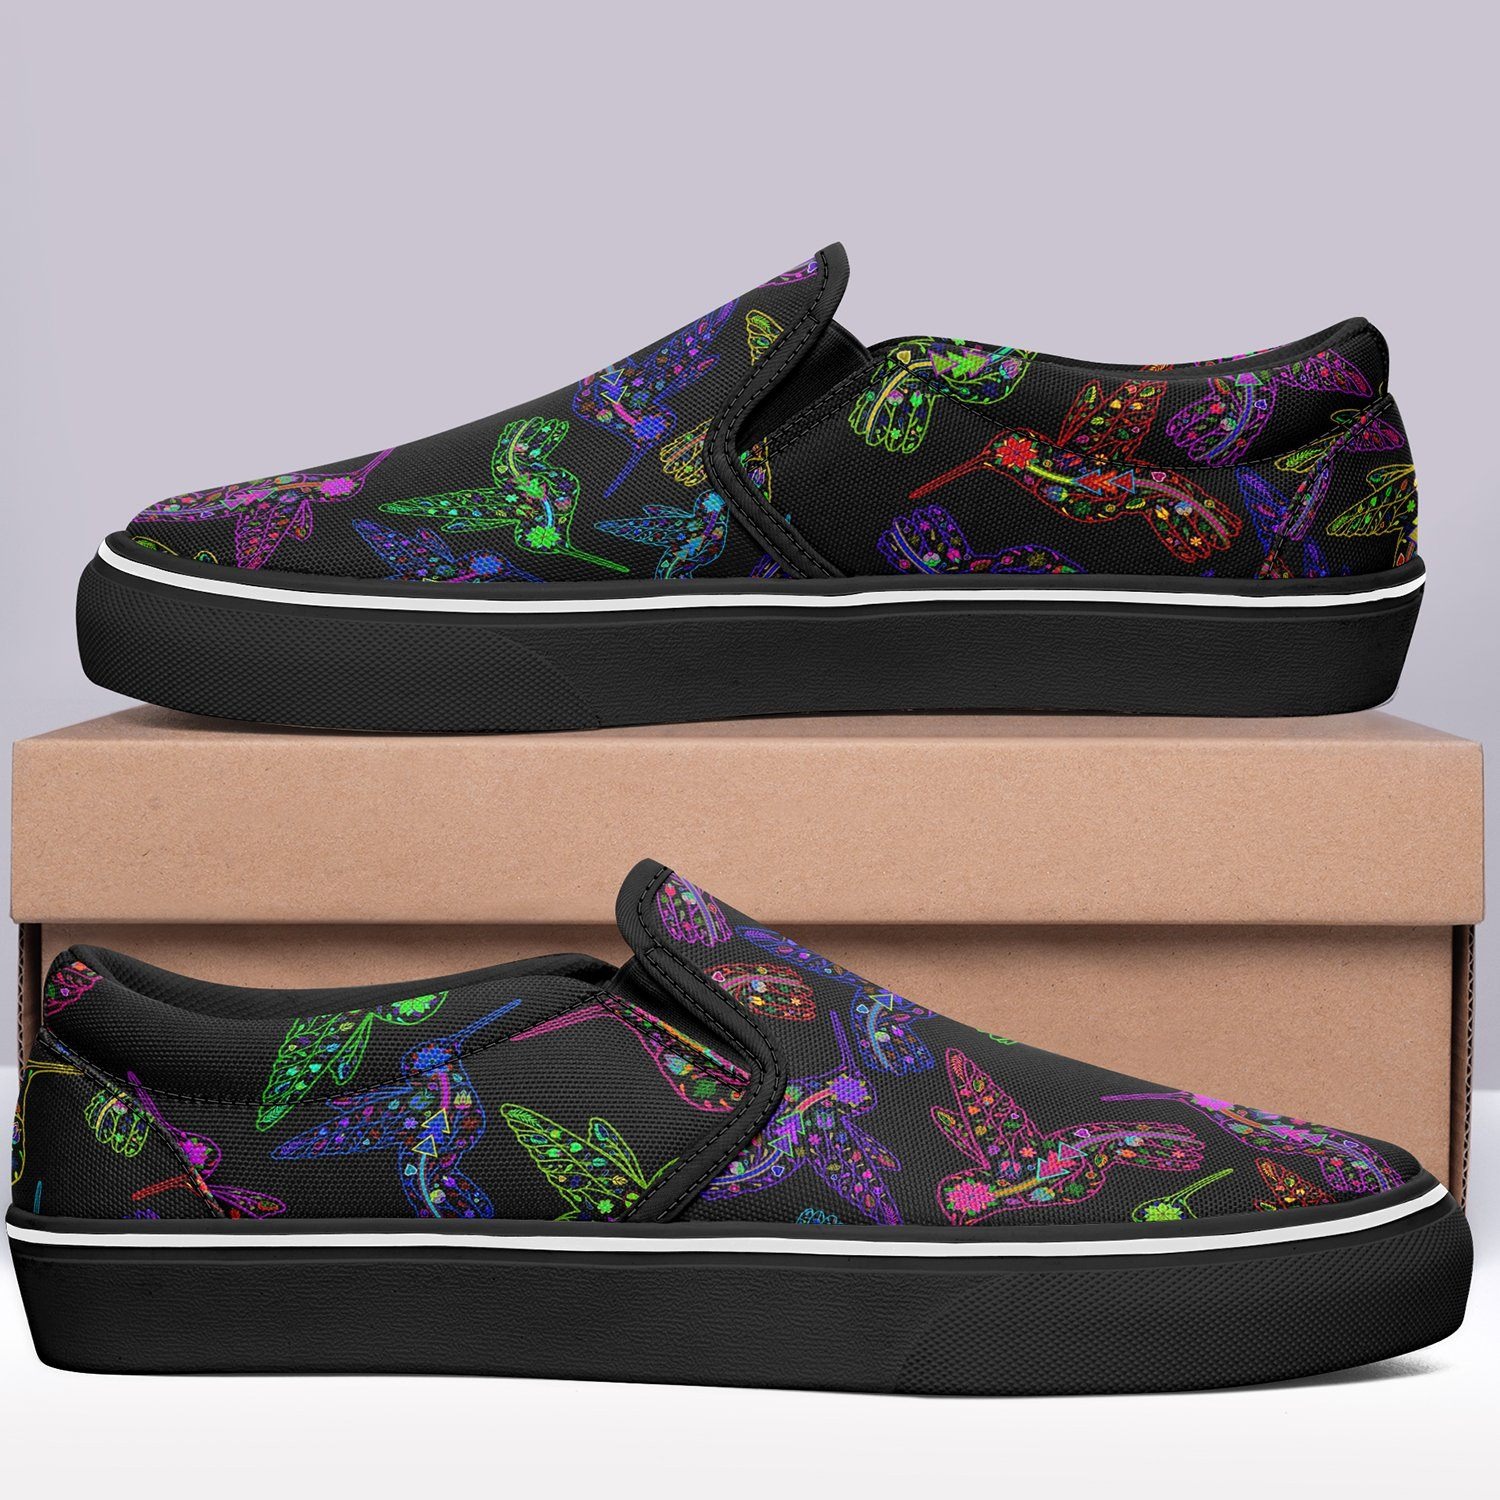 Floral Hummingbird Otoyimm Canvas Slip On Shoes